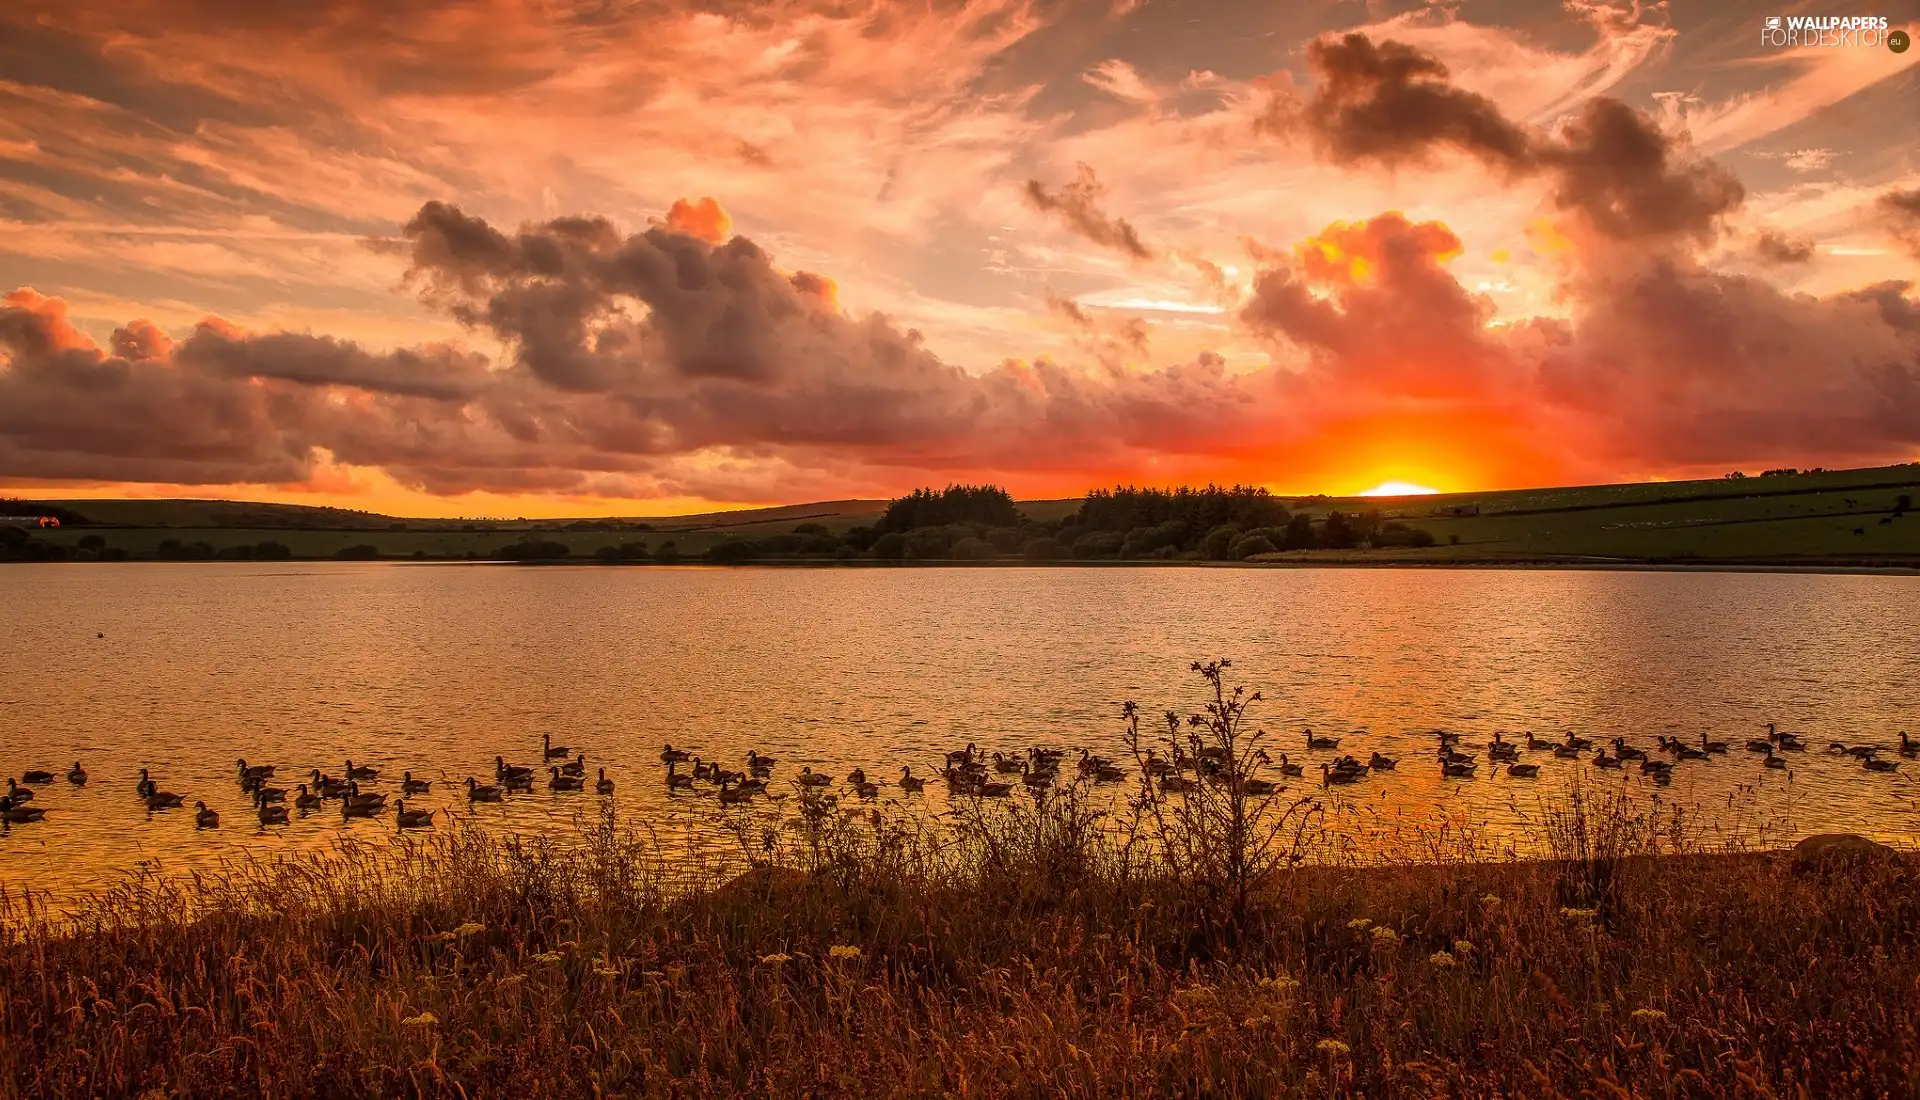 Great Sunsets, ducks, clouds, lake